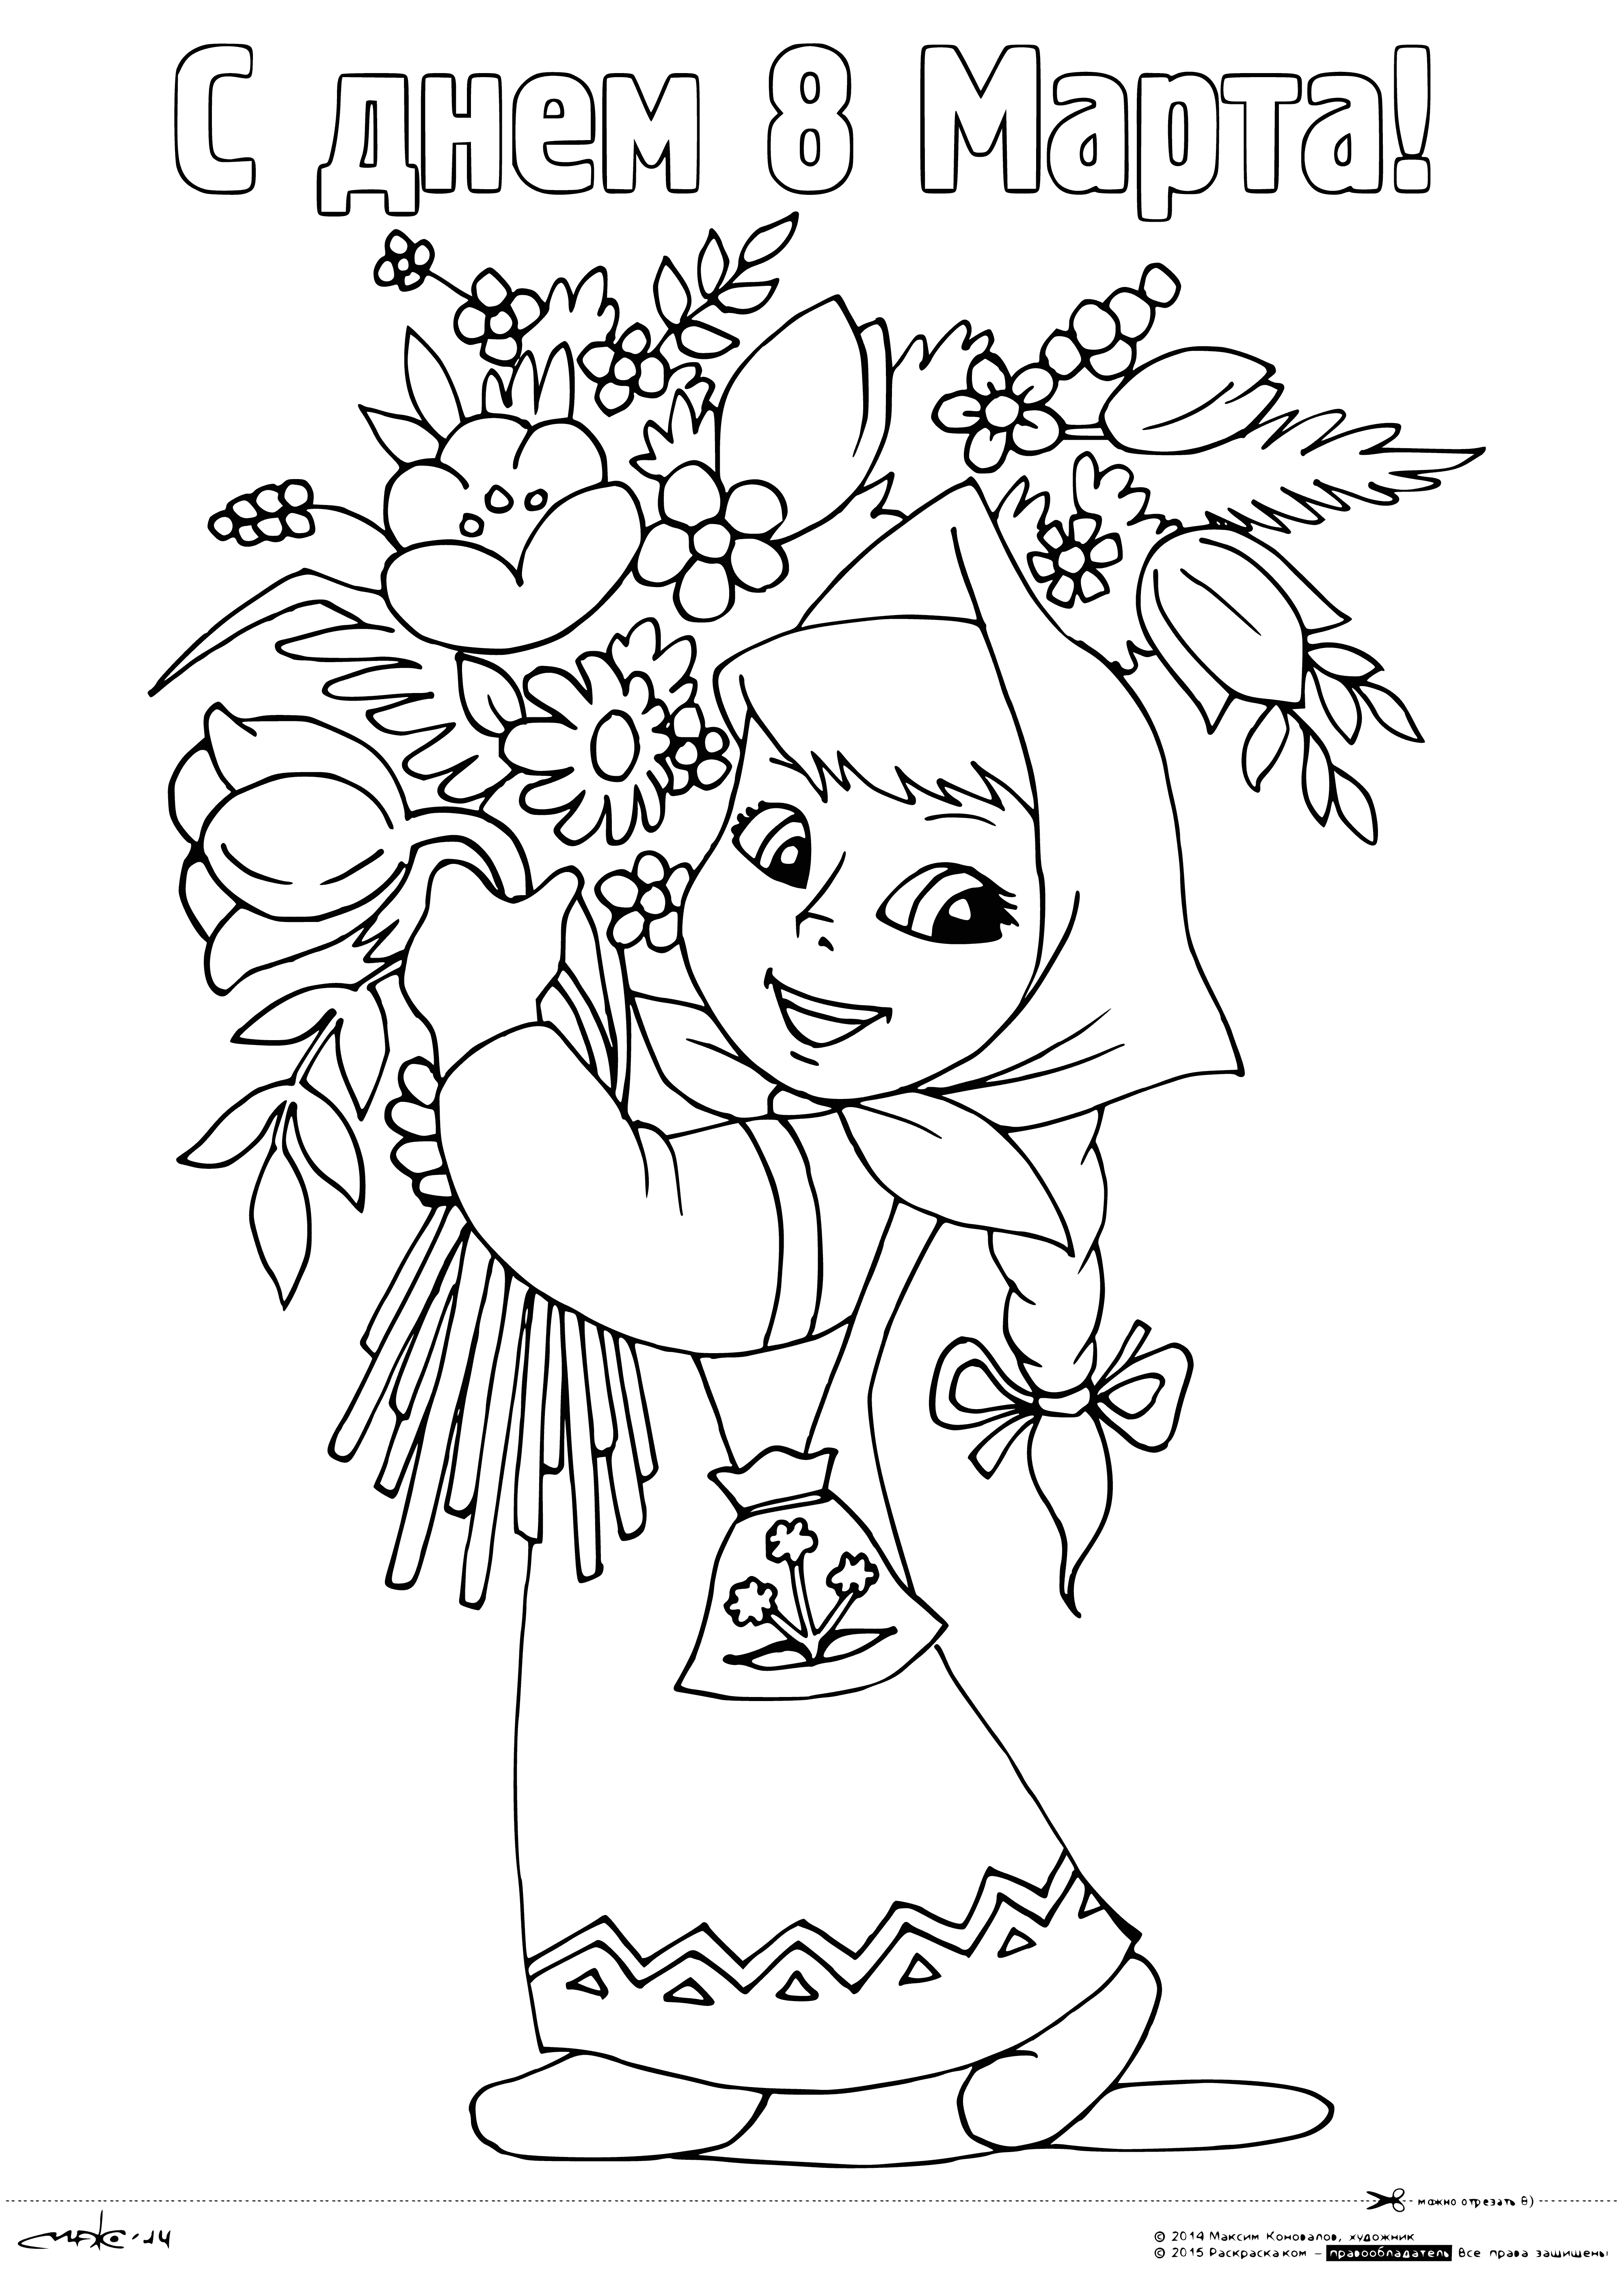 coloring page: Vases of colorful flowers blooming, petals on the ground. Varying sizes & colors, with some greenery around.